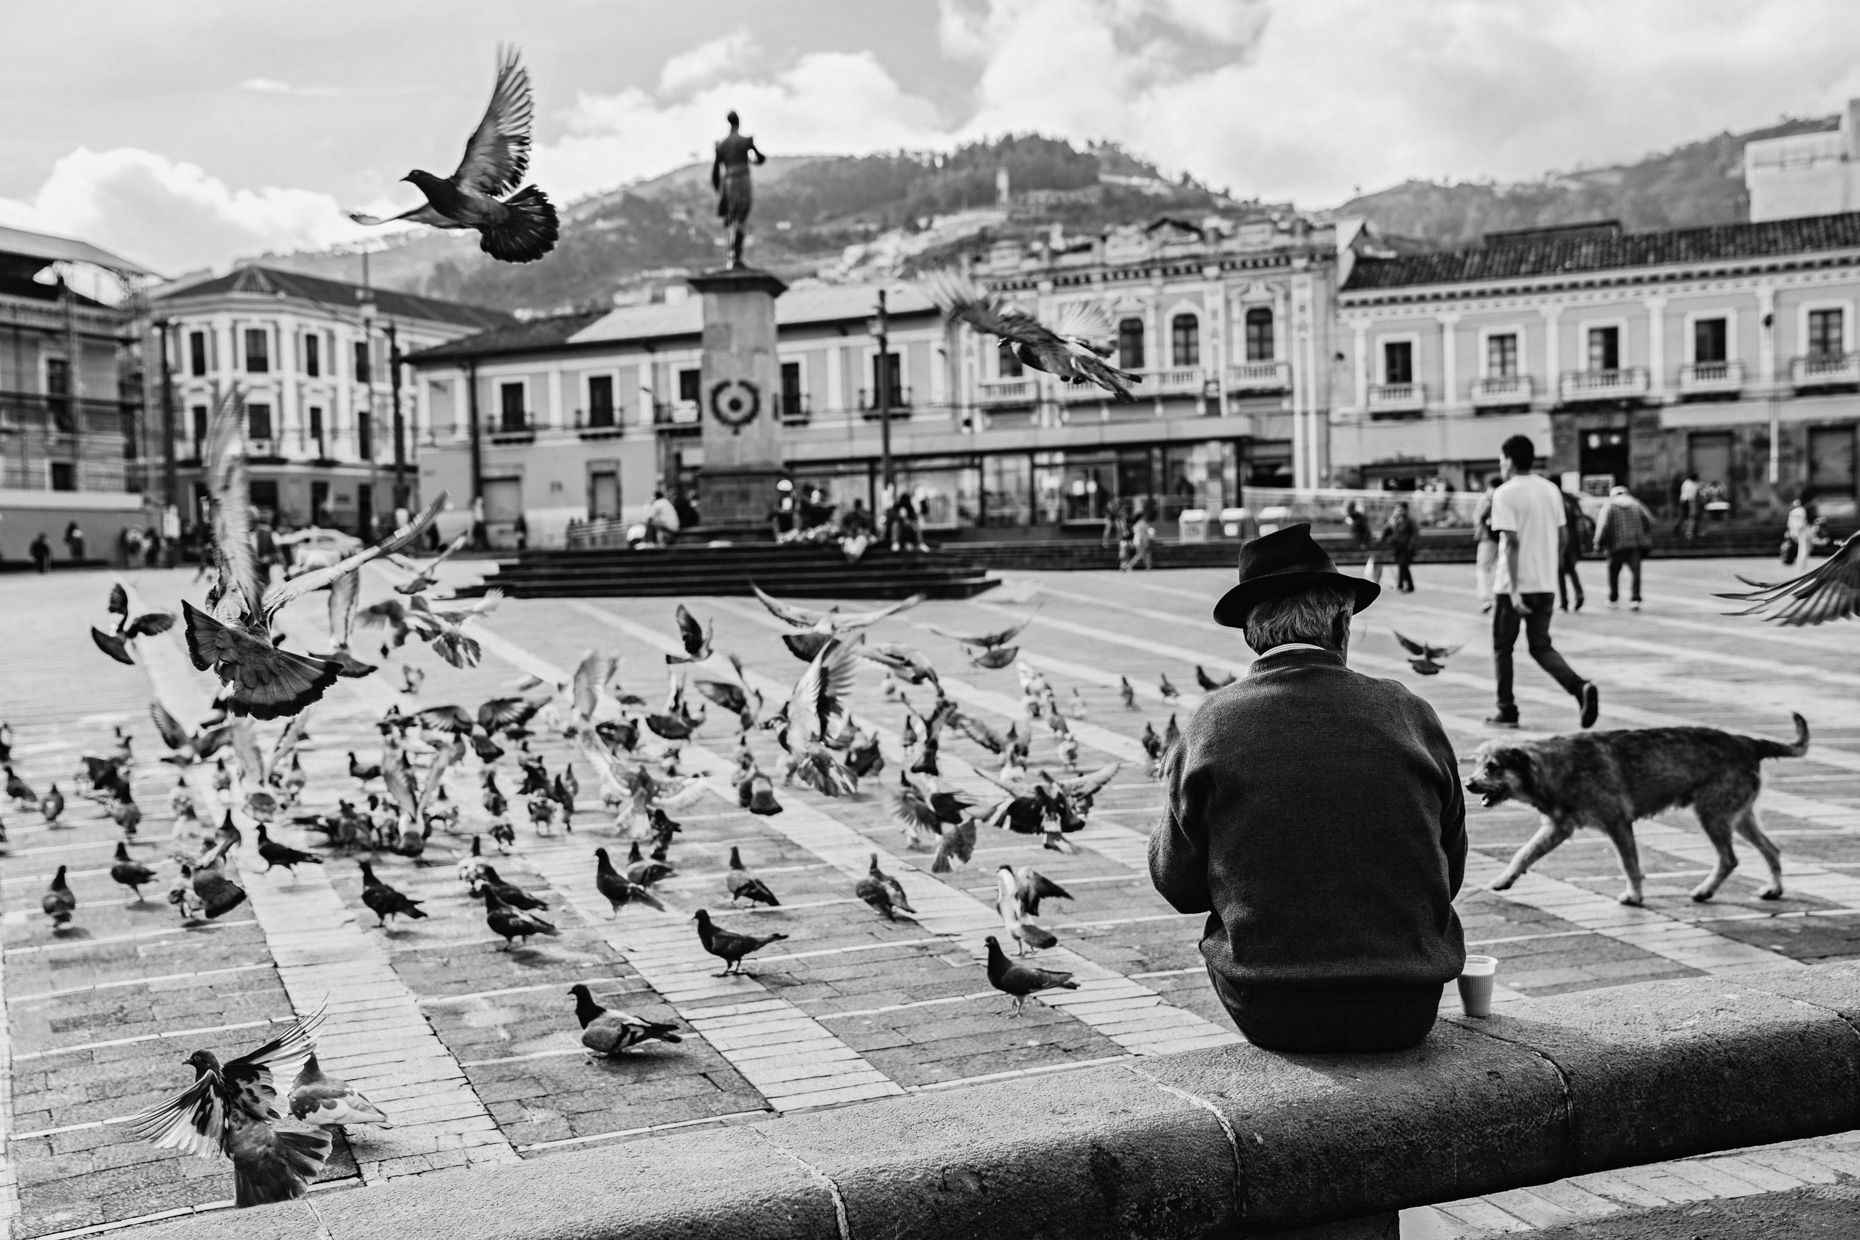 Man sitting in square in Quito, Ecuador surrounded by pigeons and a dog